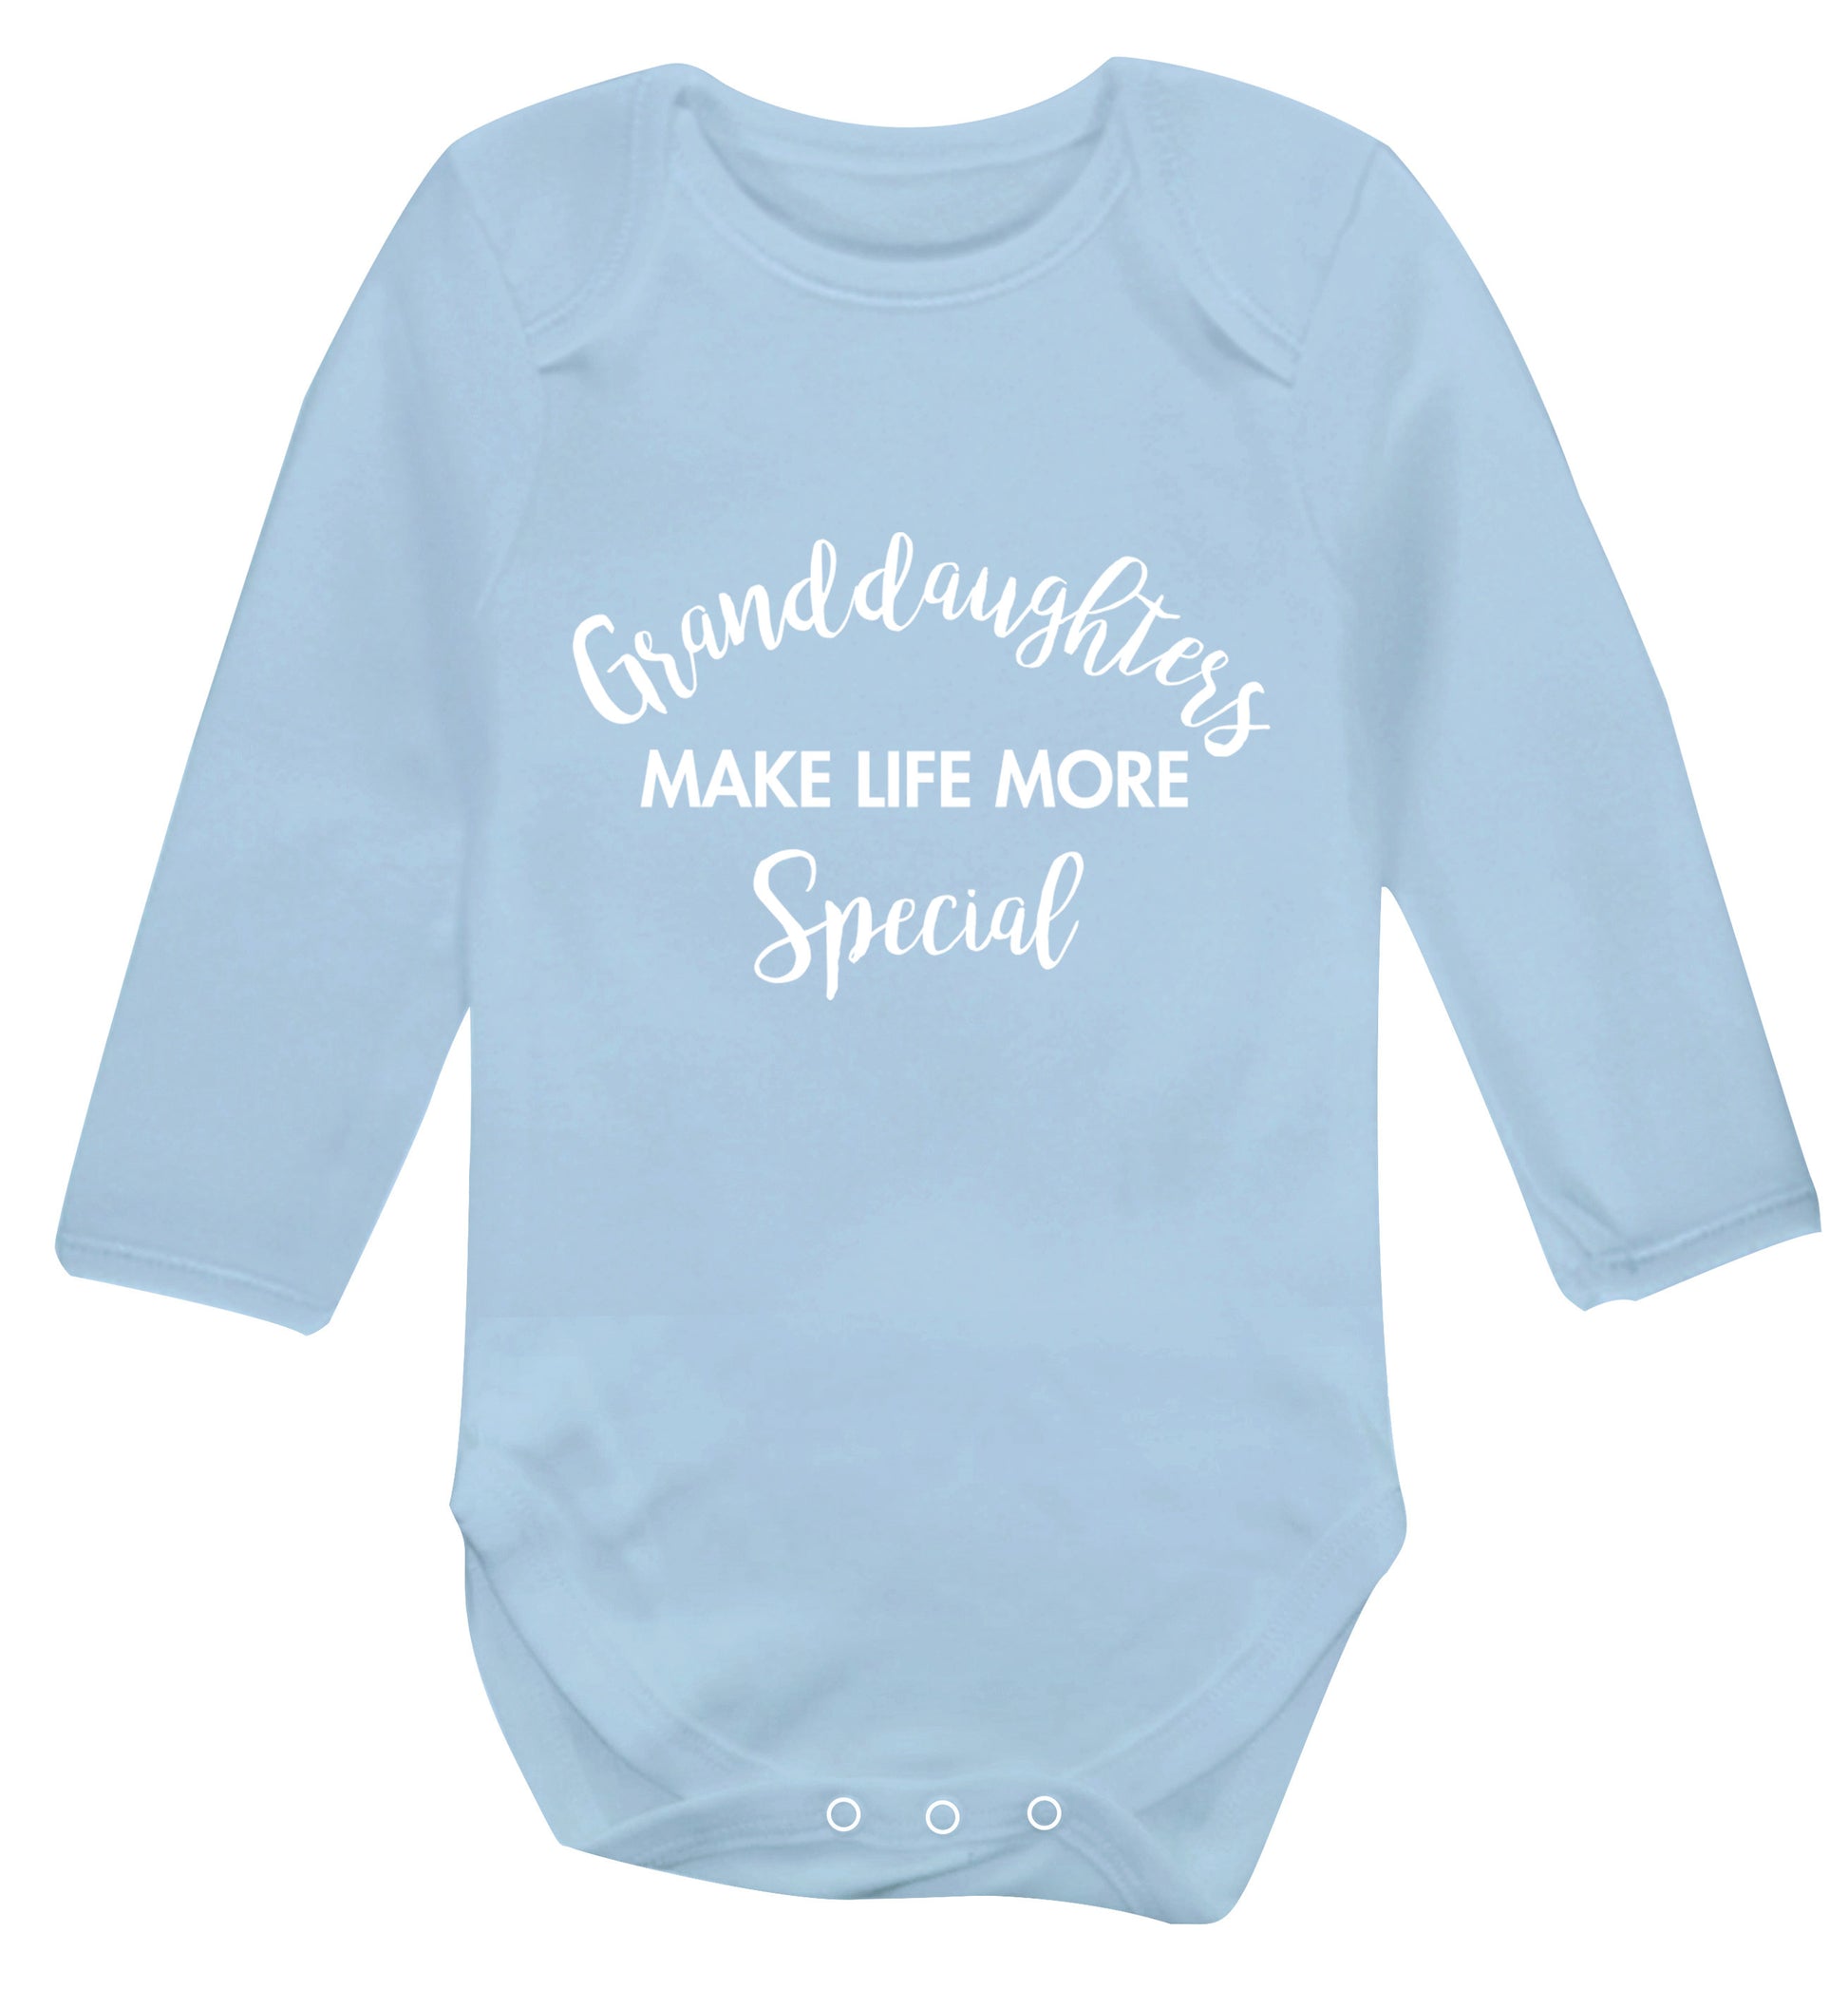 Granddaughters make life more special Baby Vest long sleeved pale blue 6-12 months